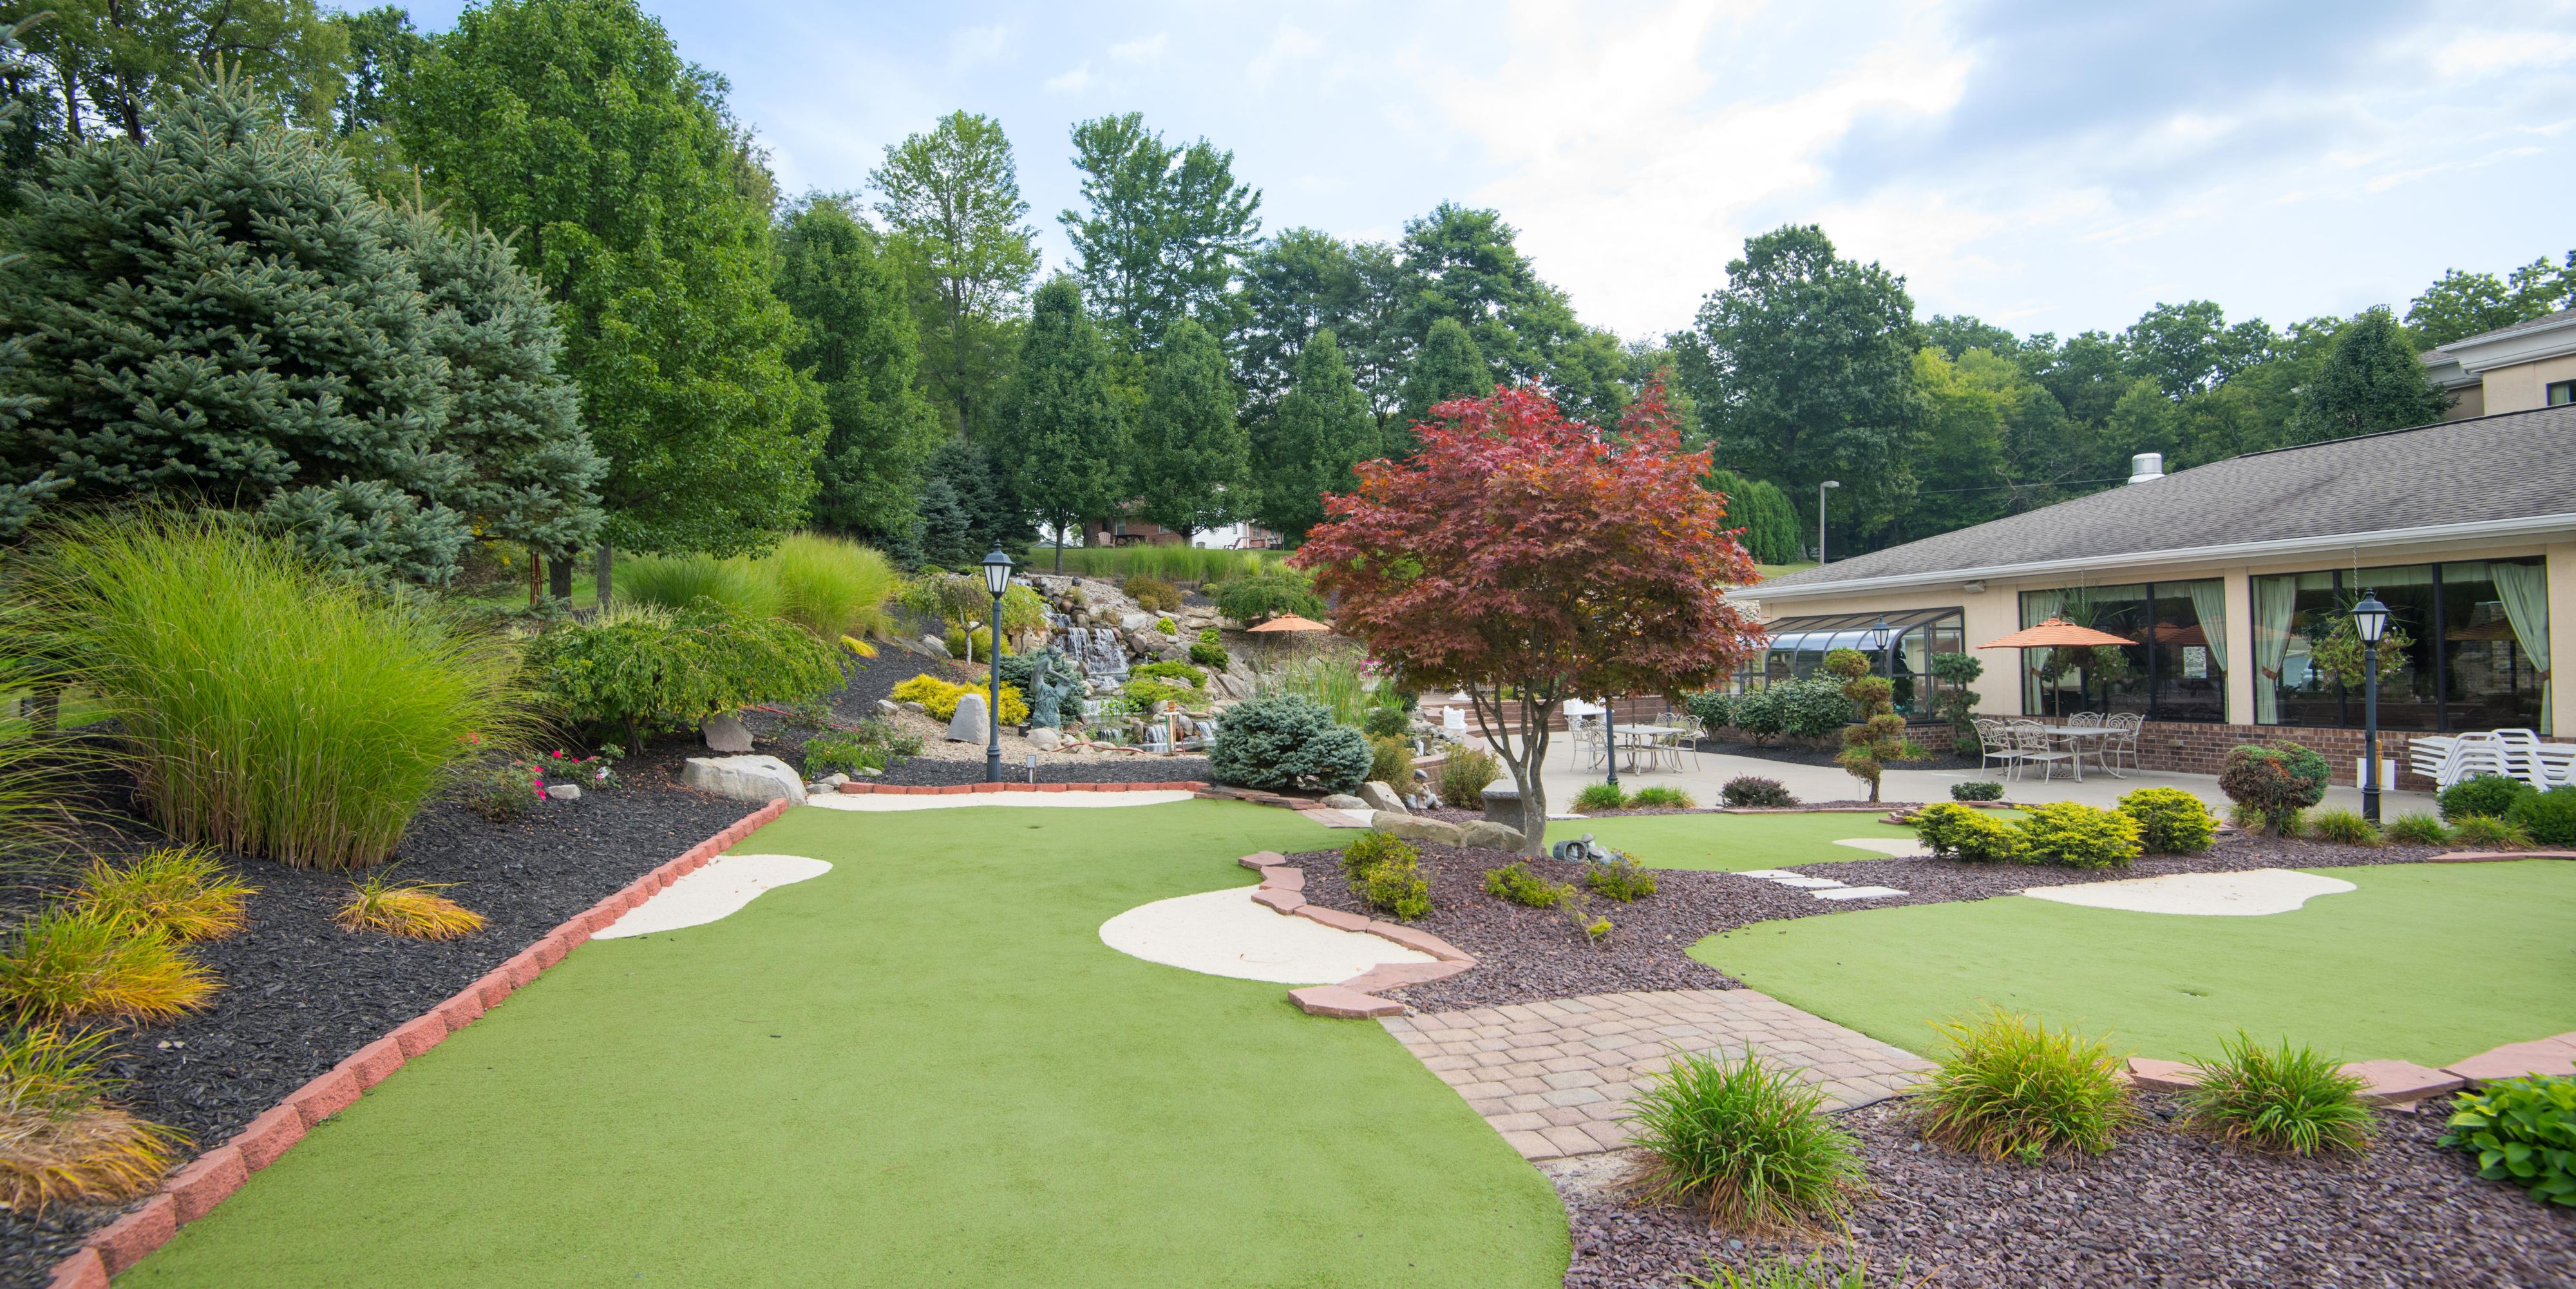 Plan to stay with us and play some of the finest Golf Courses in the area, such as Tam O'Shanter, Yankee Run and the Avalon. Afterwards take time to relax on our 3-hole putting green. The putting greens are nestled between our Beautiful waterfall, patio and Koi pond.